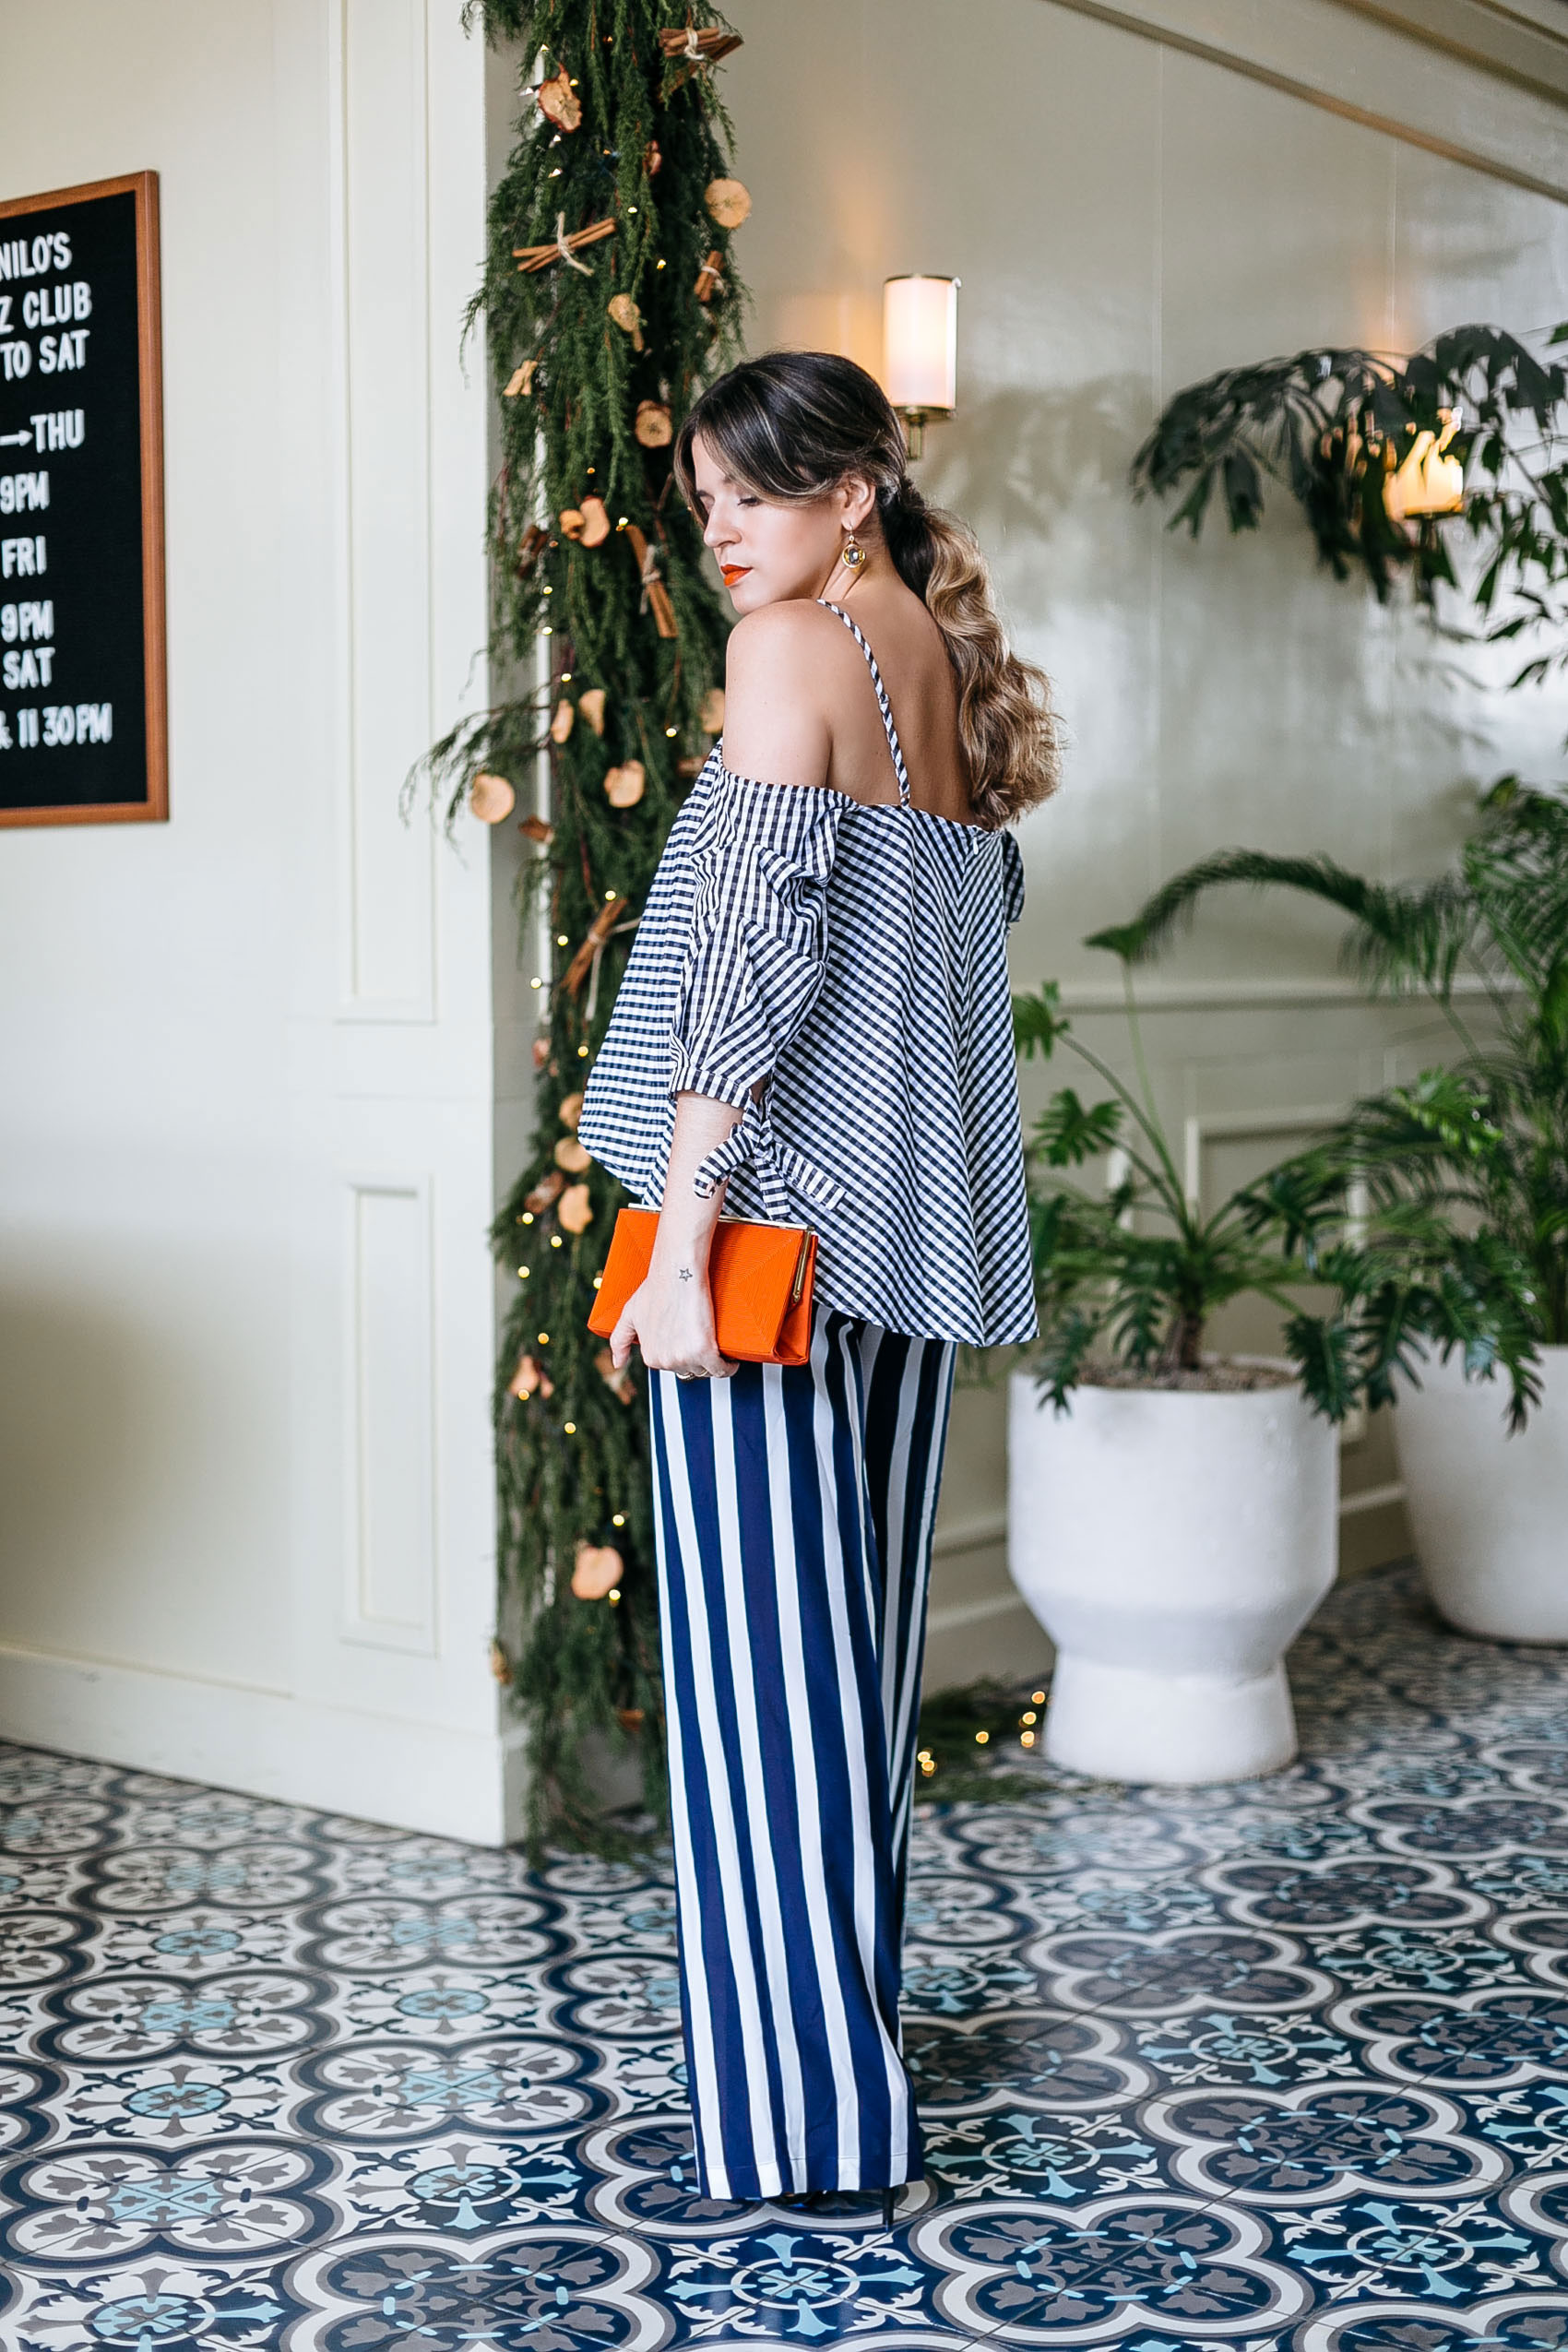 Maristella at the American Trade Hotel wearing a gingham blouse with stripe pants and a red clutch